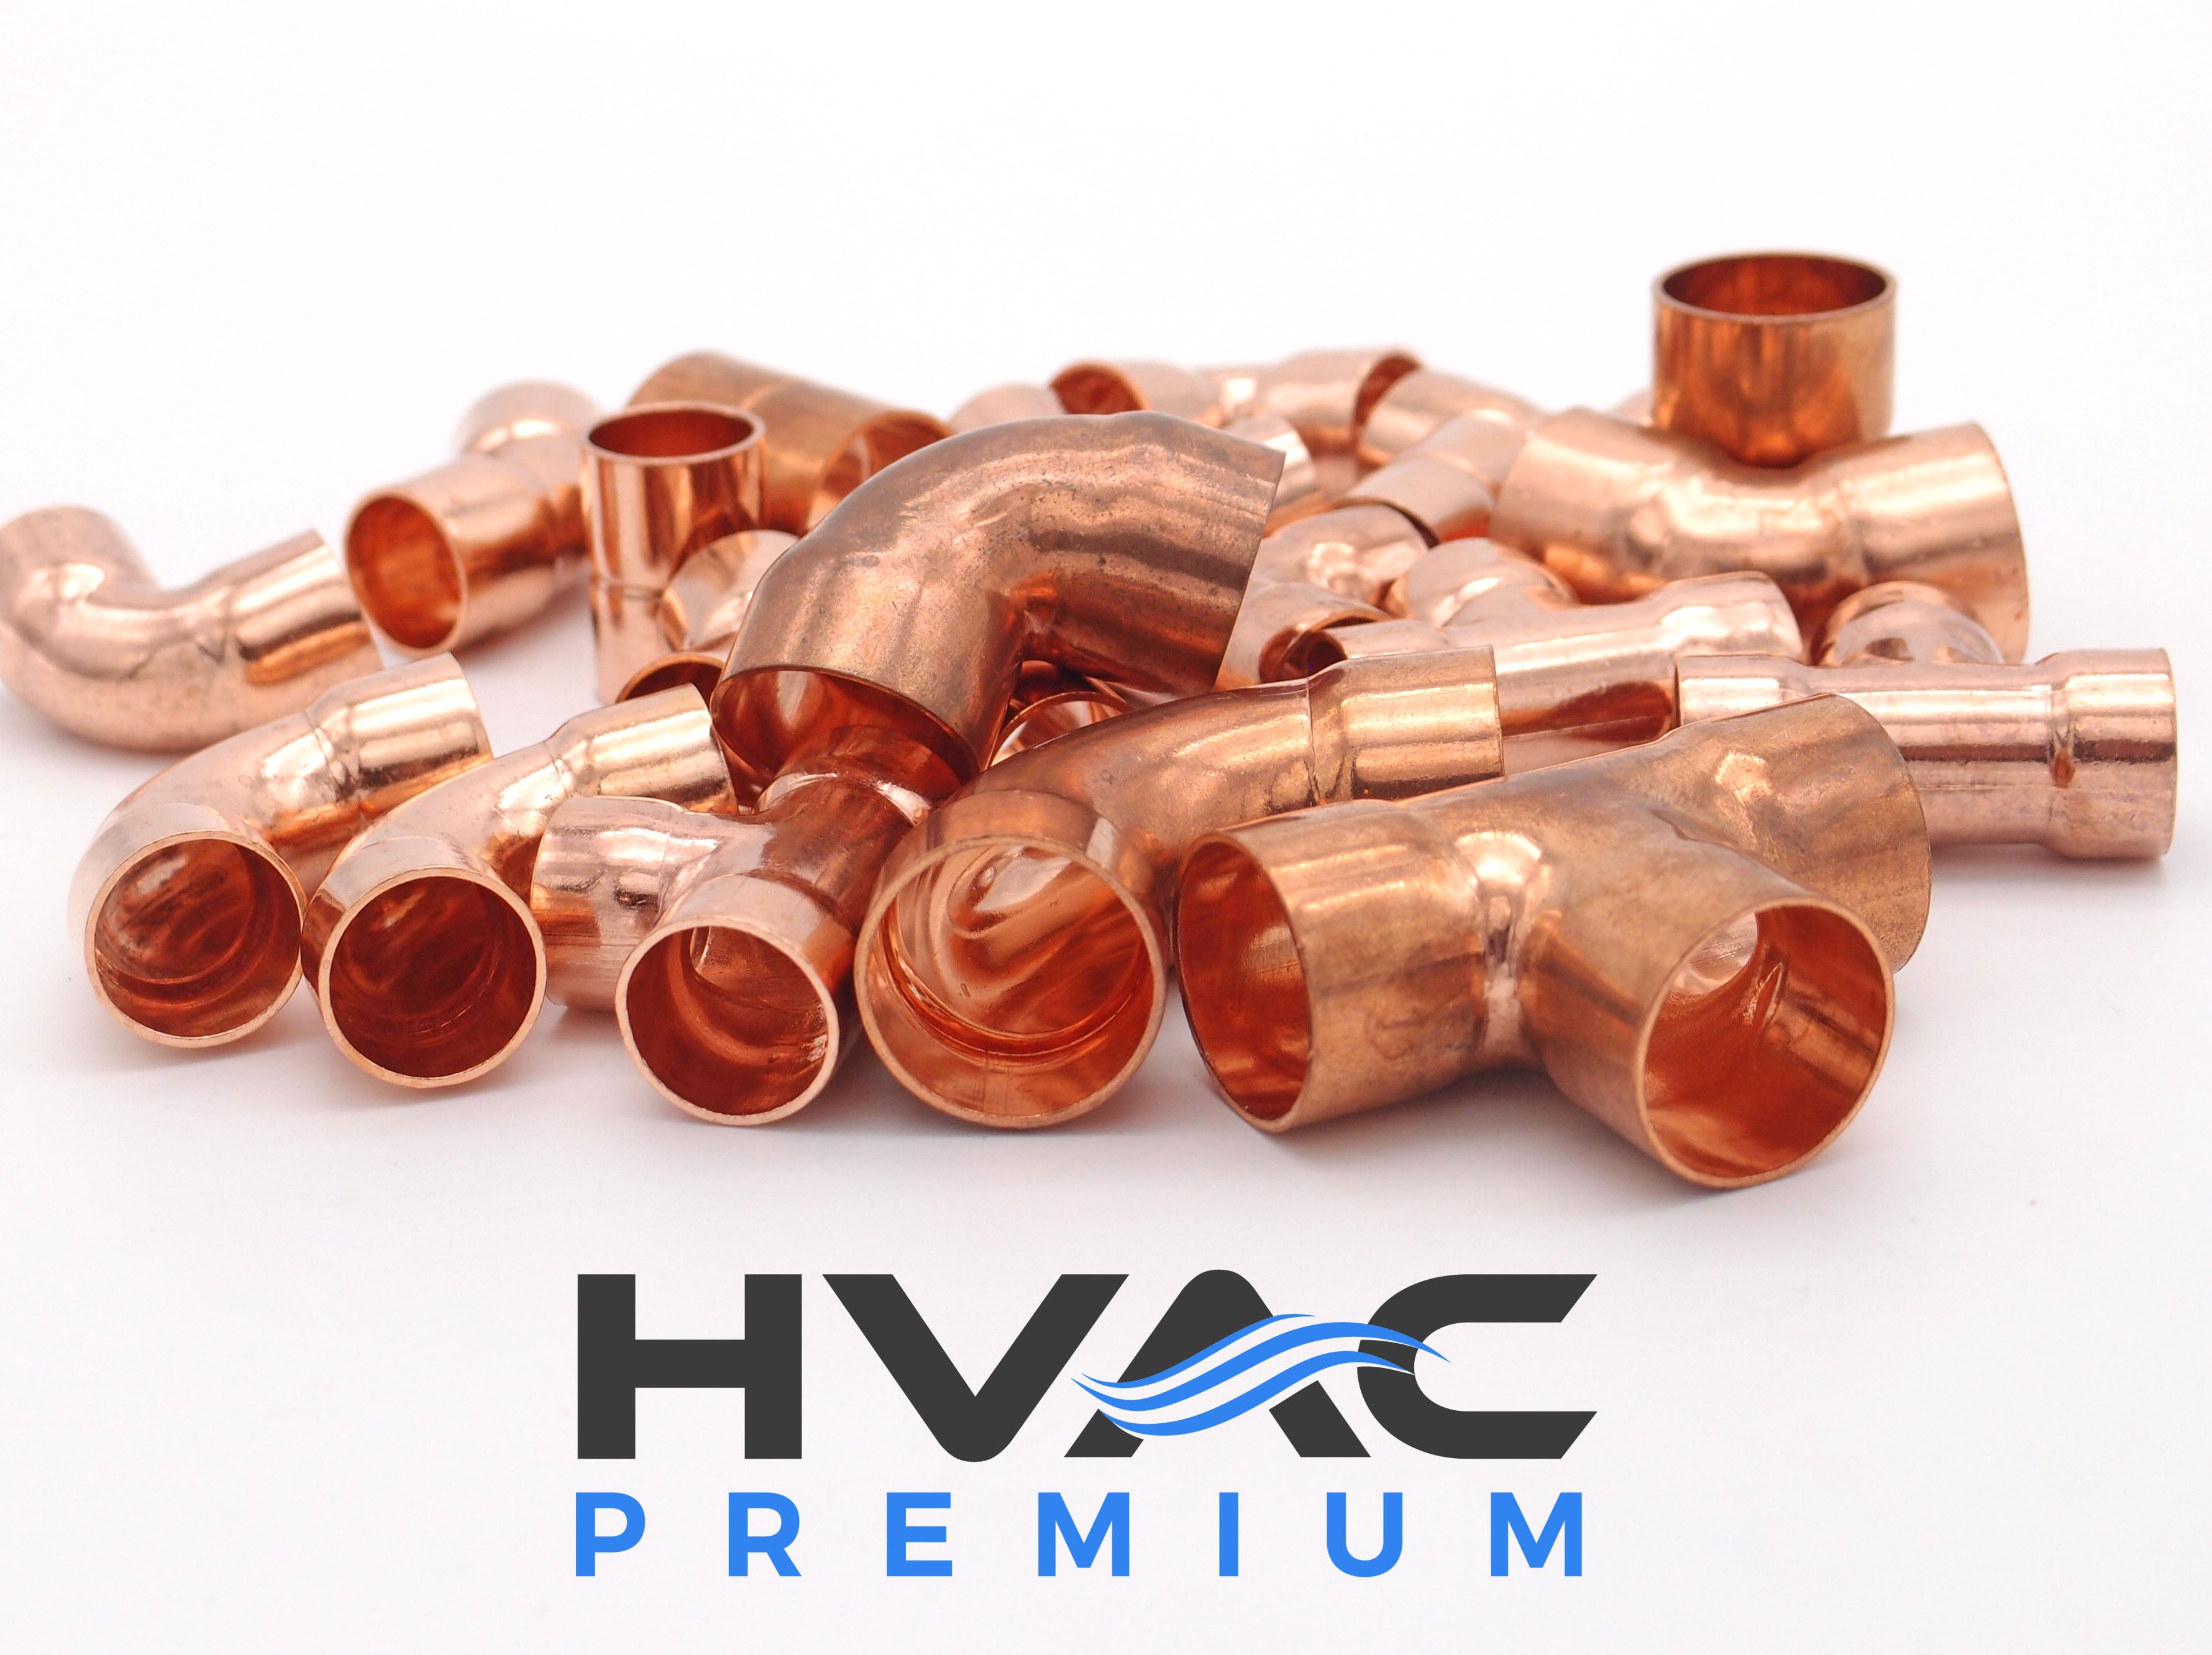 Copper Fitting 3/4 Inch (HVAC Outer Dimension) 5/8 Inch (Plumbing Inner Dimension) - Copper 90 Degree Elbow Fitting Connector - 99.9% Pure Copper - 5 Pack